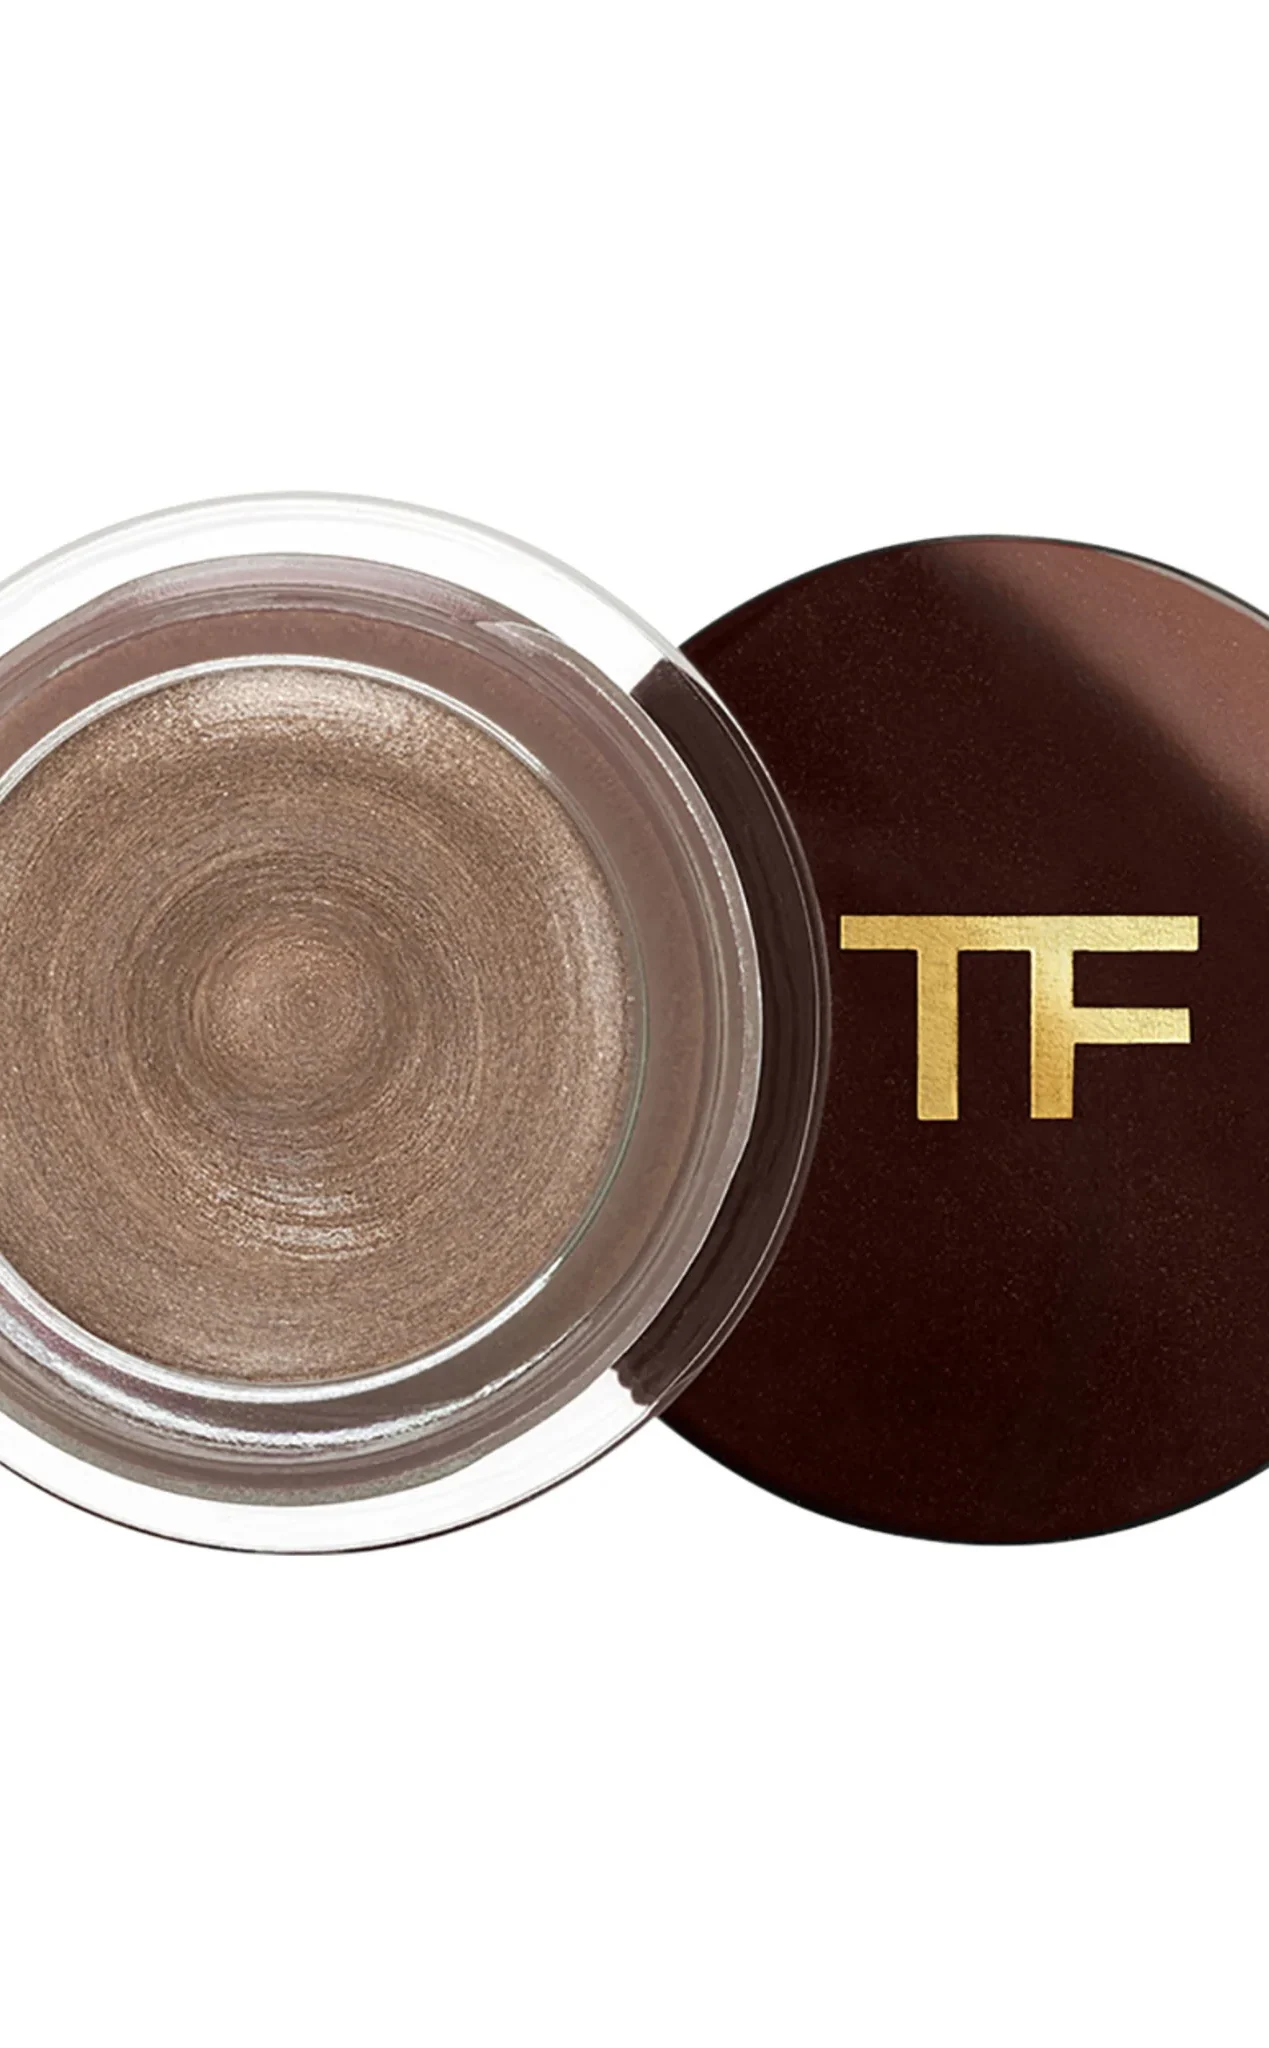 3. Tom Ford Cream Color For Eyes